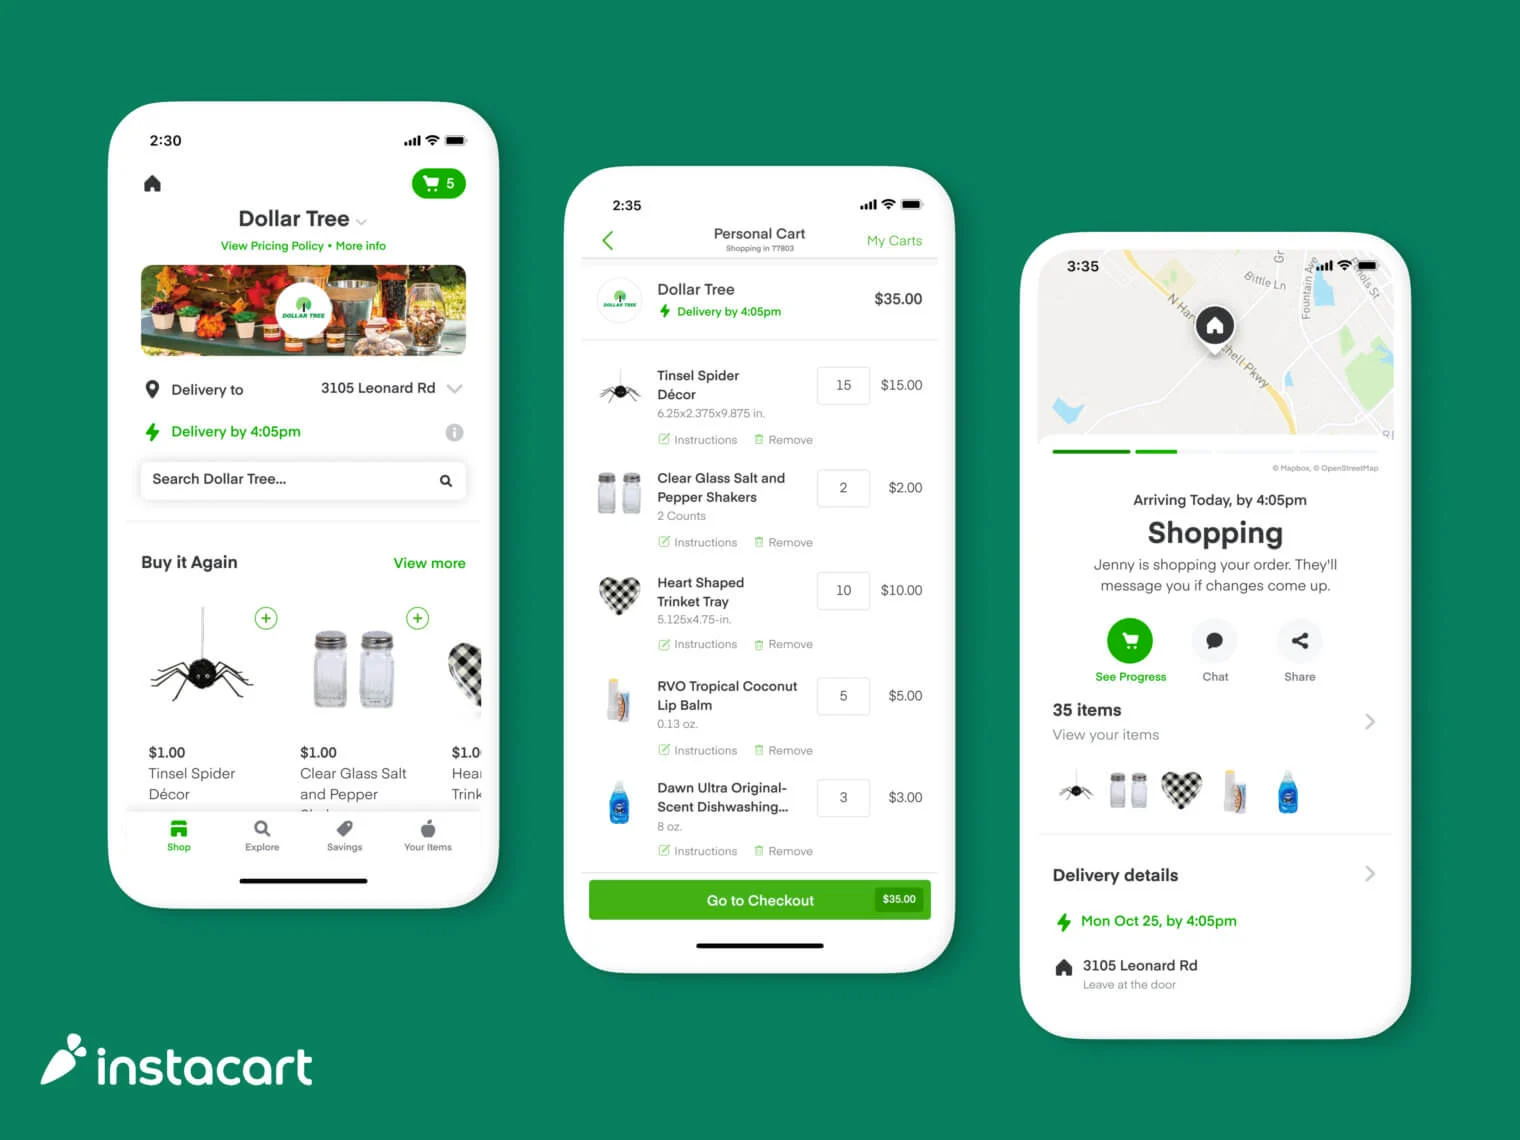 An example of Instacart's app showing items at Dollar Tree